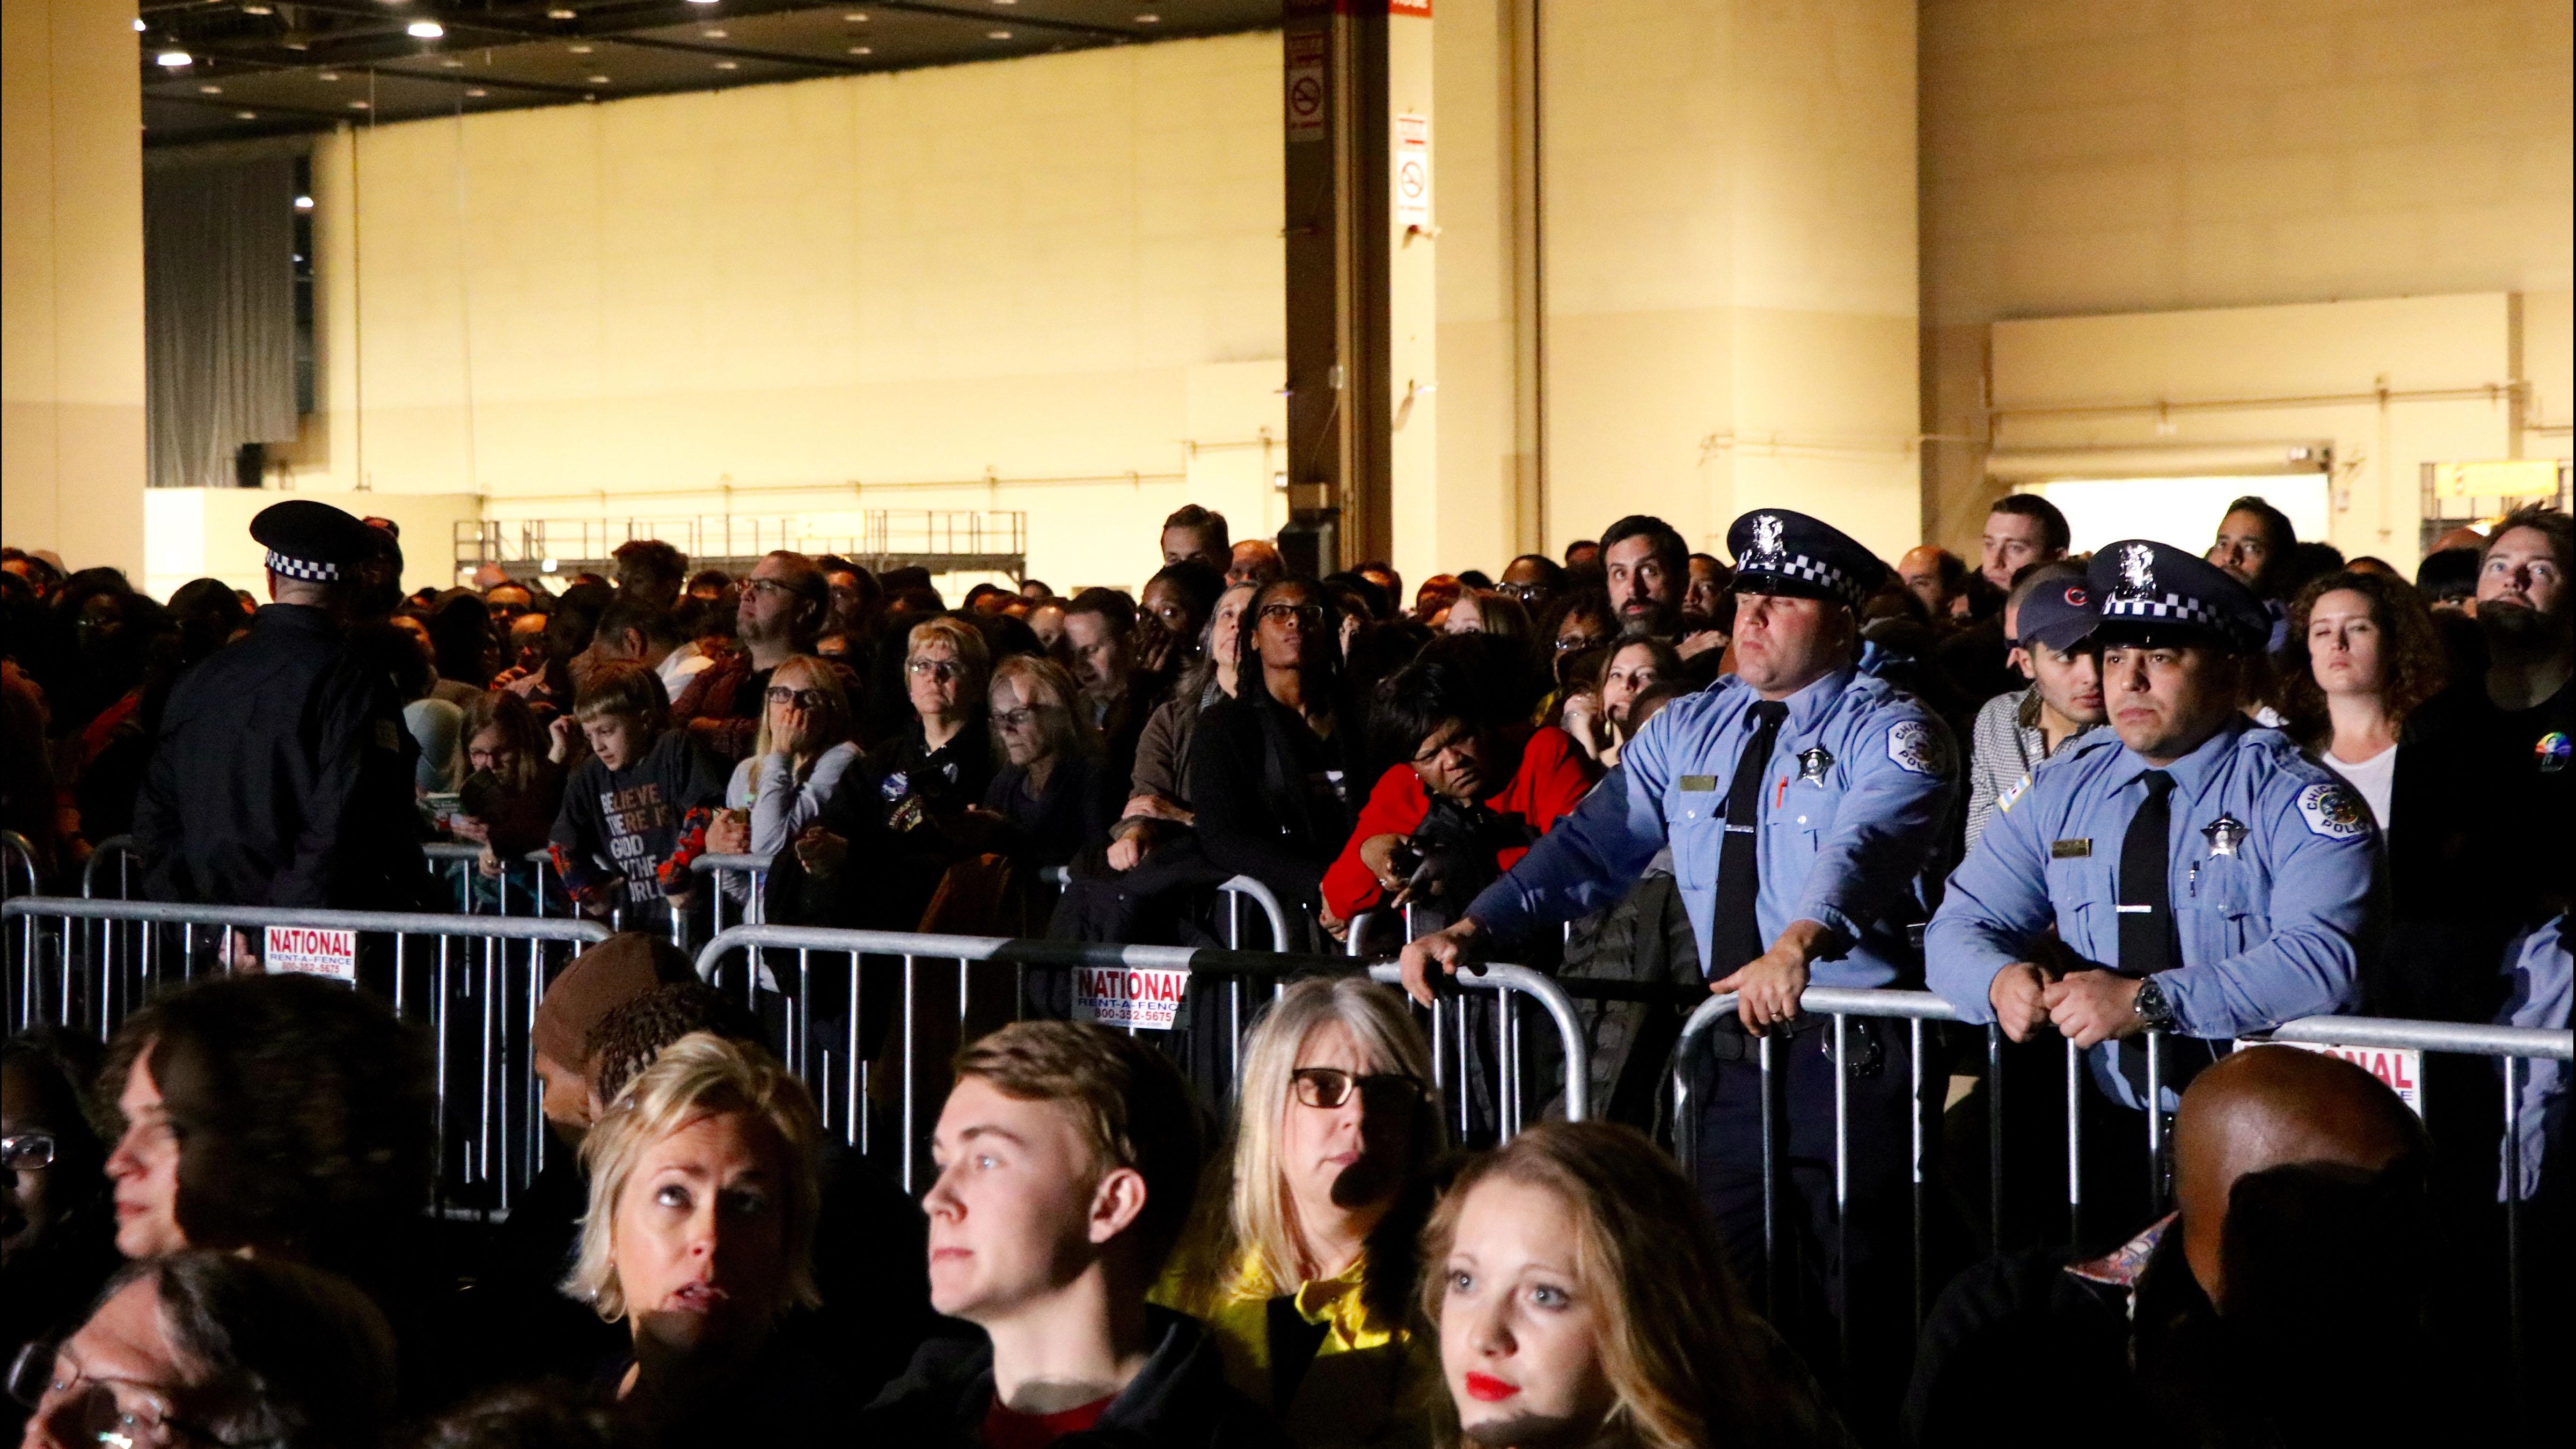 Attendees and two police officers waiting before the opening act begins. (Evan Garcia / Chicago Tonight)